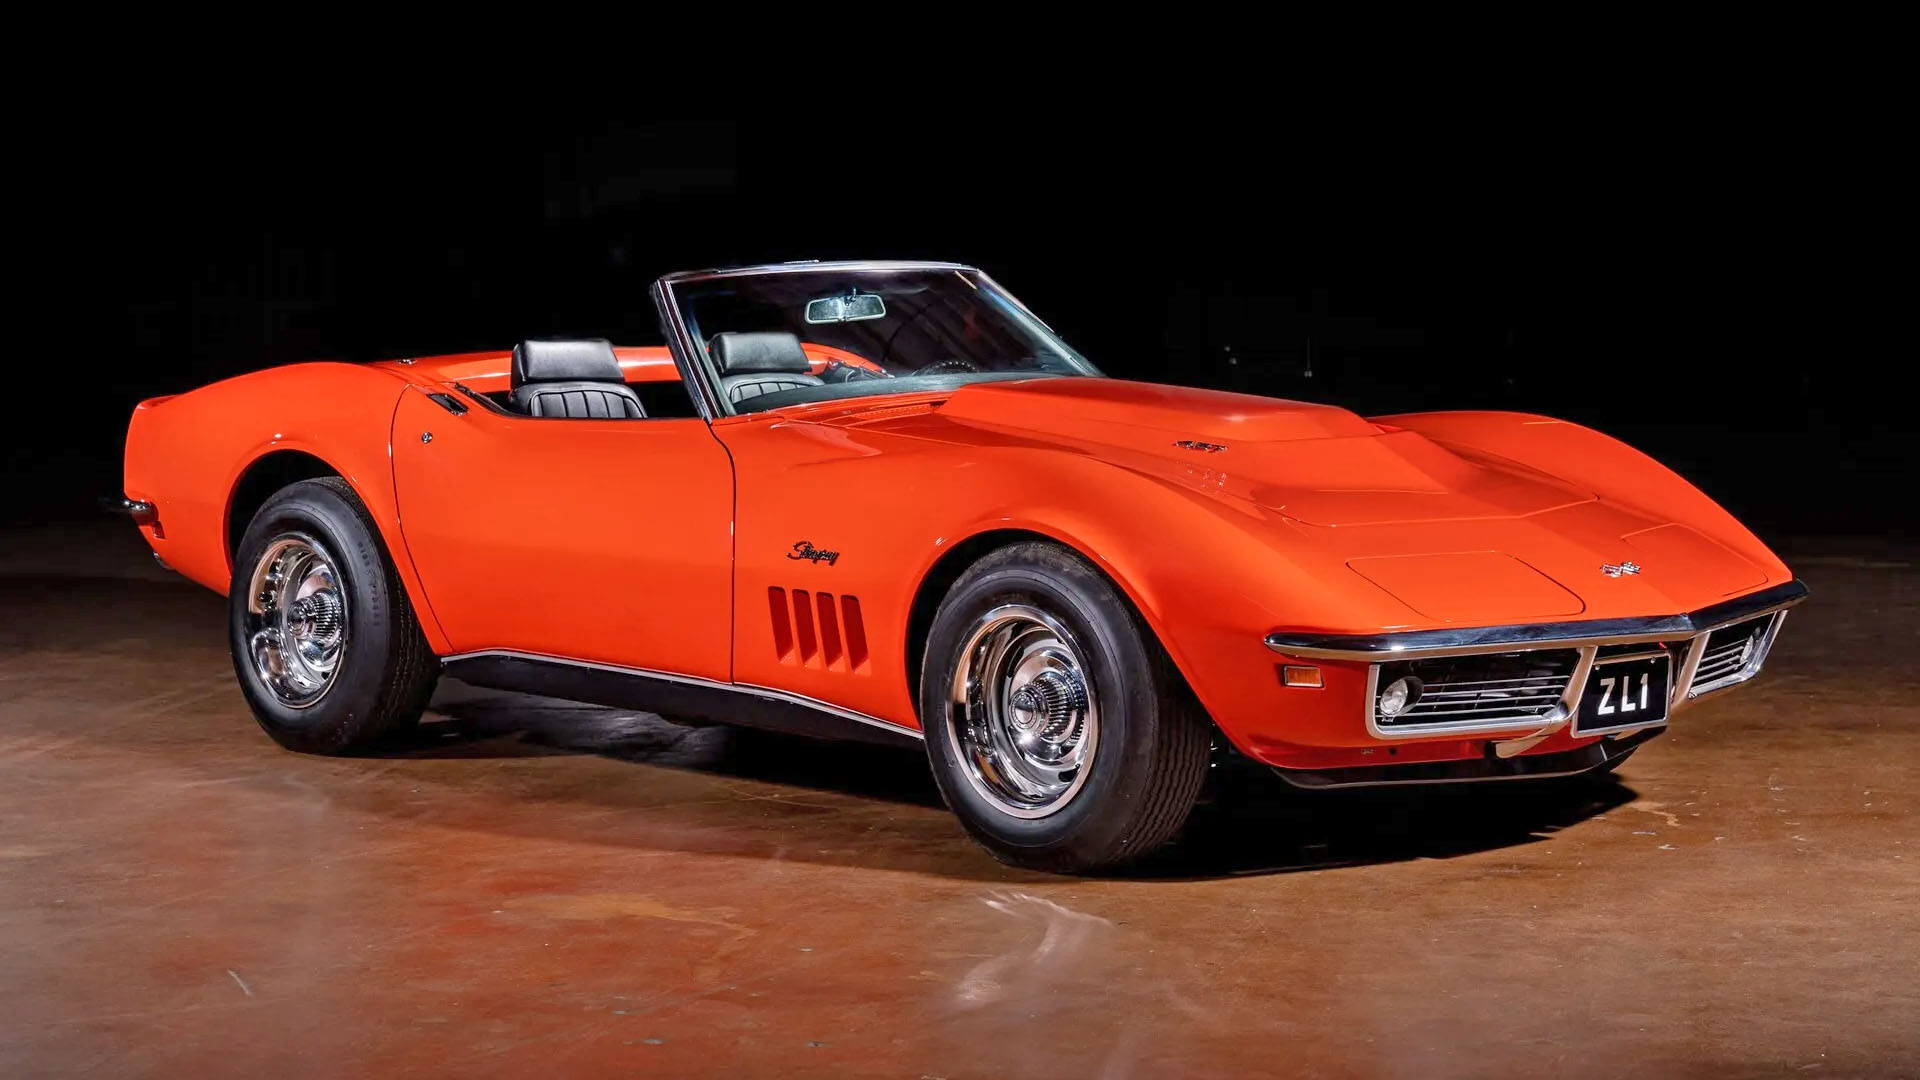 1969 Chevrolet Corvette Stingray Could Become Most Expensive 'Vette Ever Sold